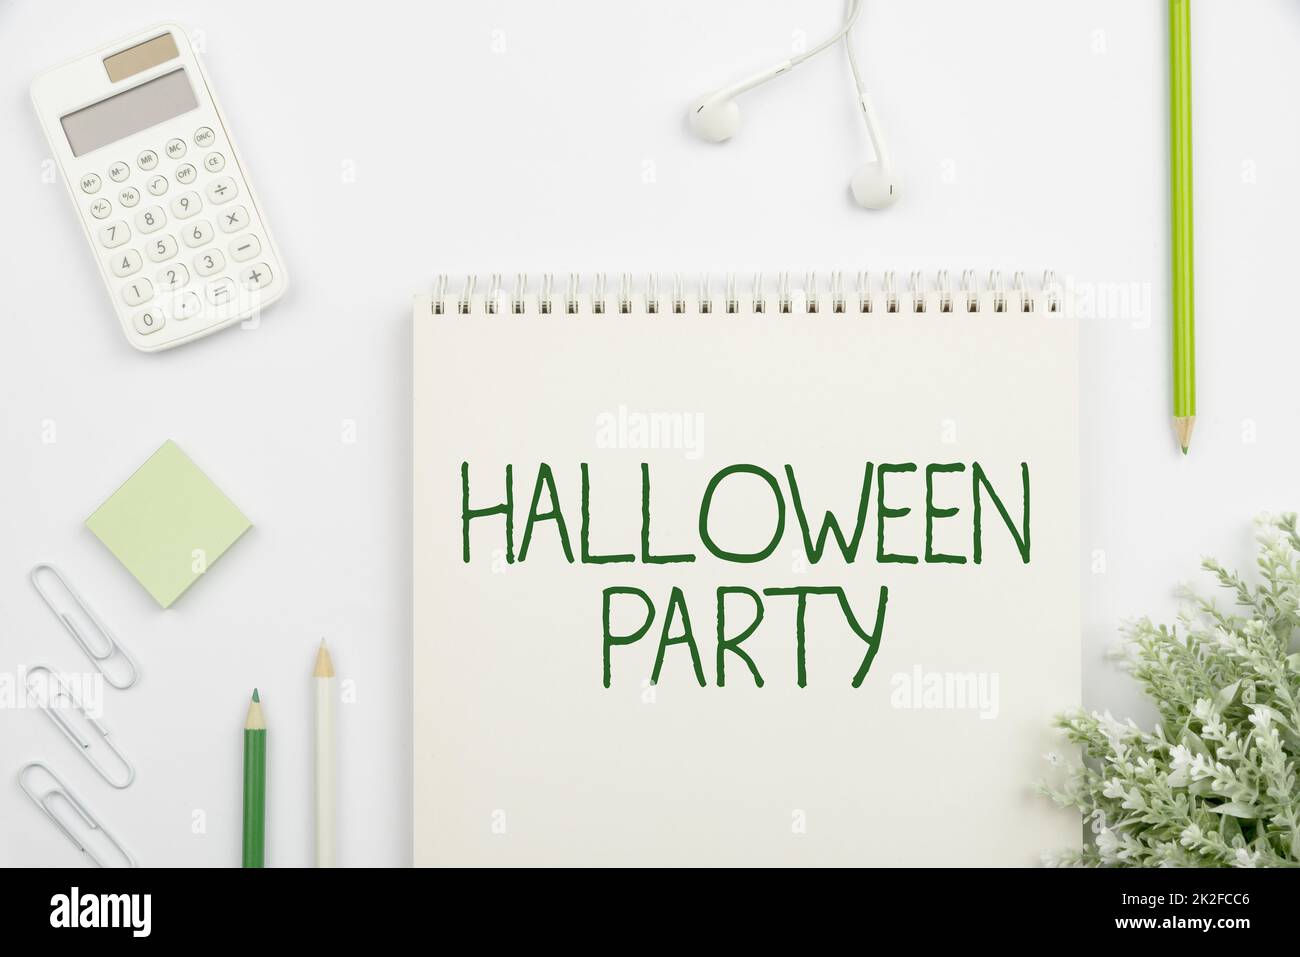 Inspiration showing sign Halloween Party. Business overview eve of the Western Christian feast of All Hallows Day Multiple Assorted Collection Office Stationery Photo Placed Over Table Stock Photo